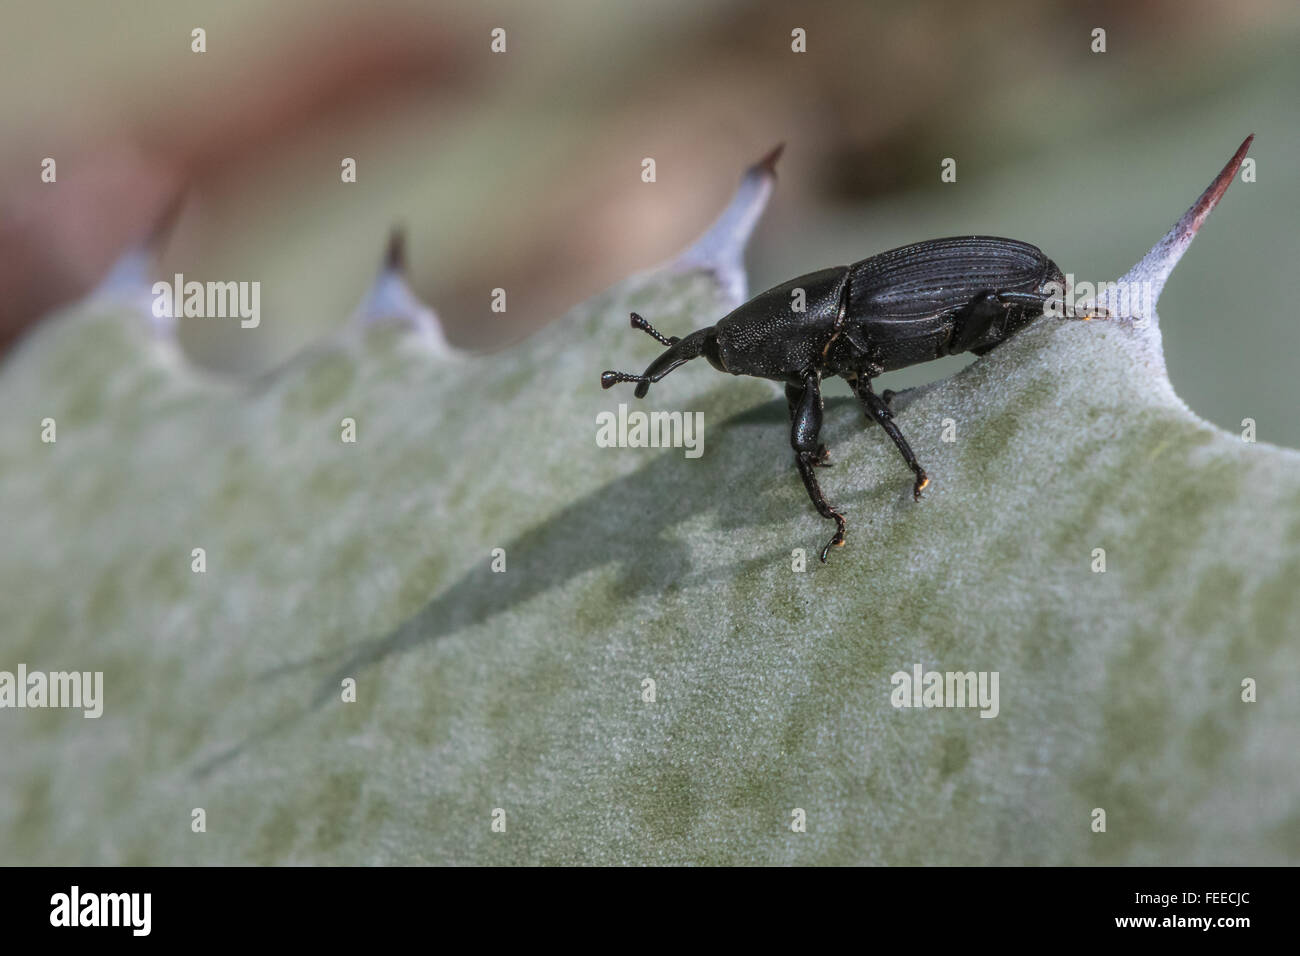 A small black beetle checks out its shadow while perched on an agave leaf Stock Photo